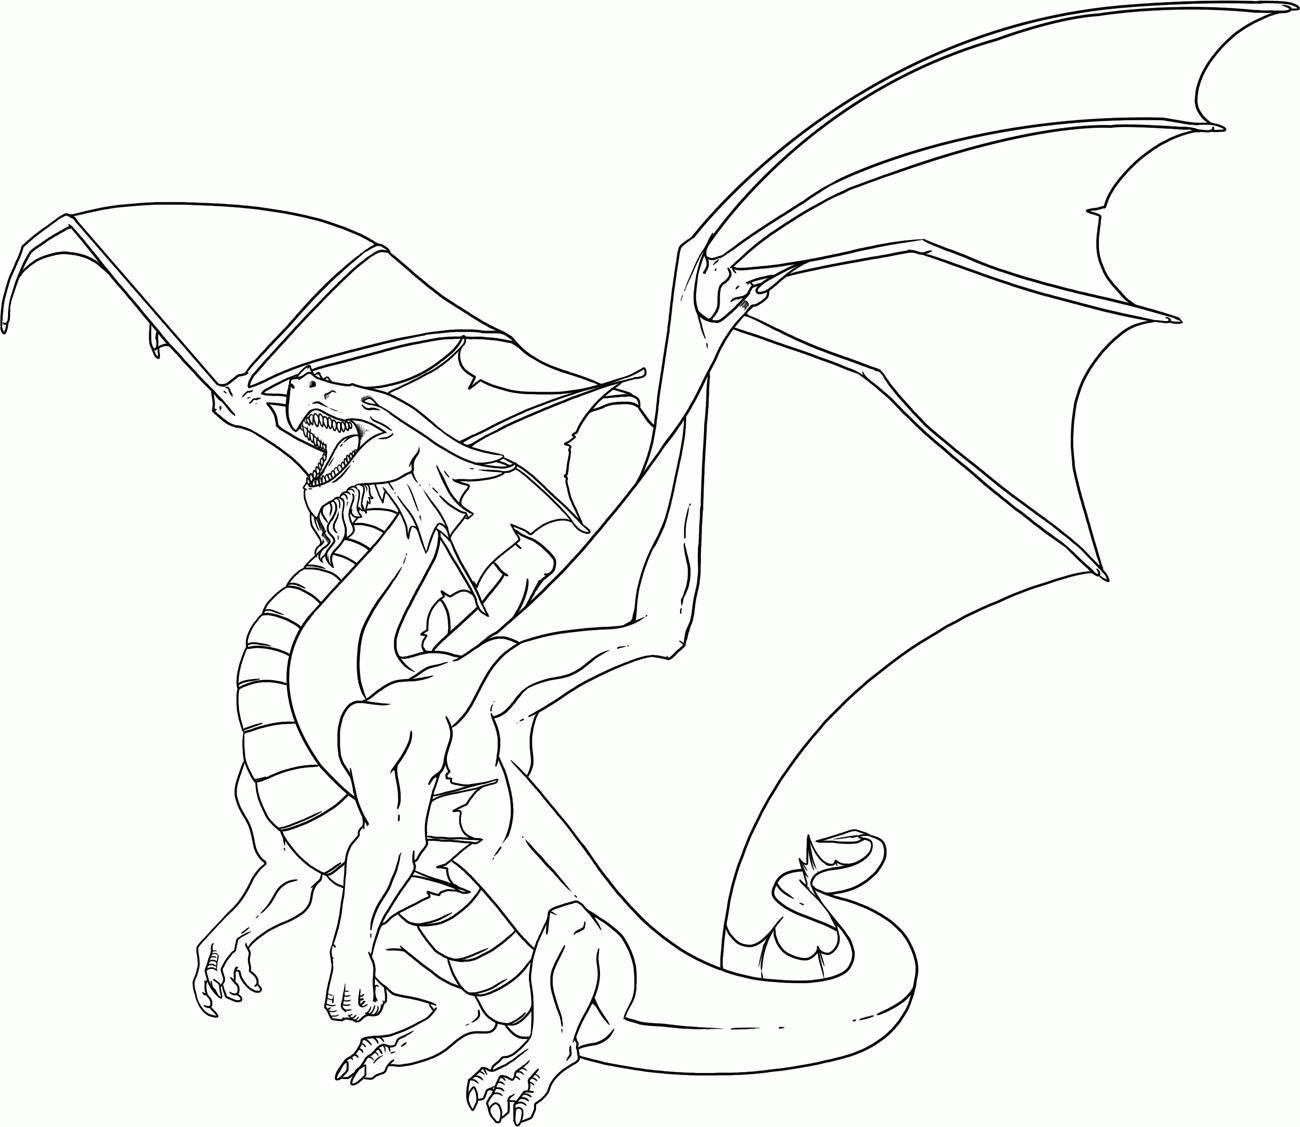 Fire Breathing Dragon Coloring Pages - Coloring Home